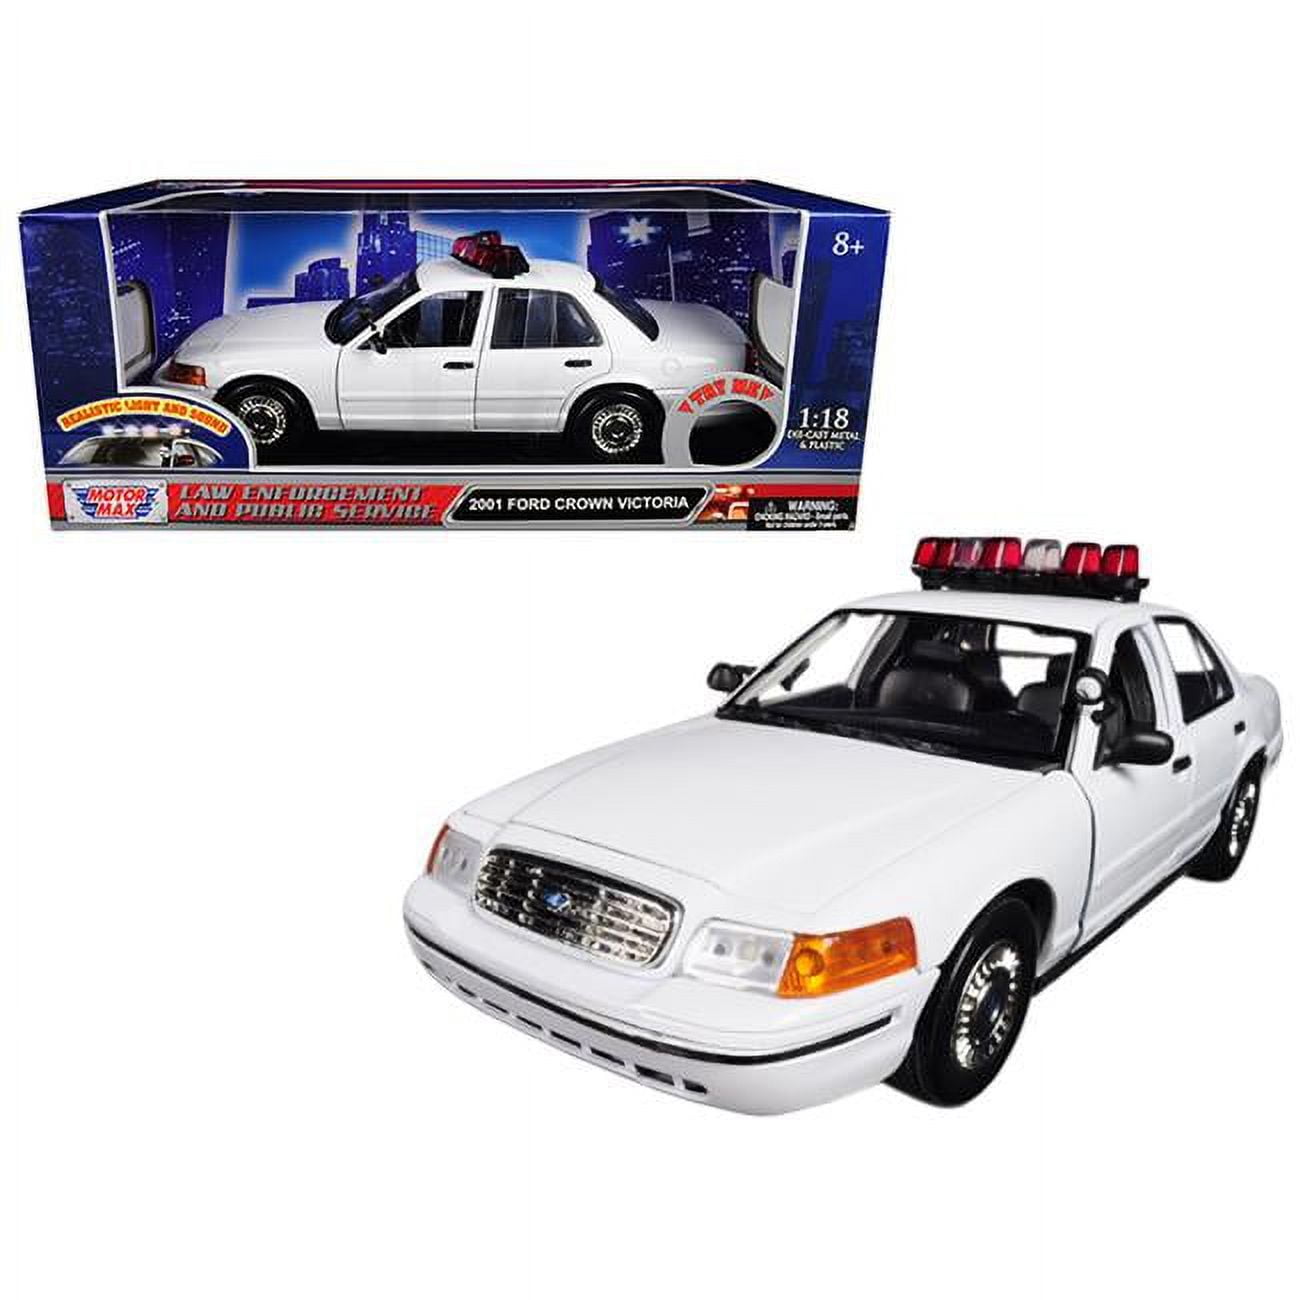 73992 1-18 2001 Ford Crown Victoria Police Diecast Model Car with Front & Rear Lights & Sound, White -  Motormax Toy